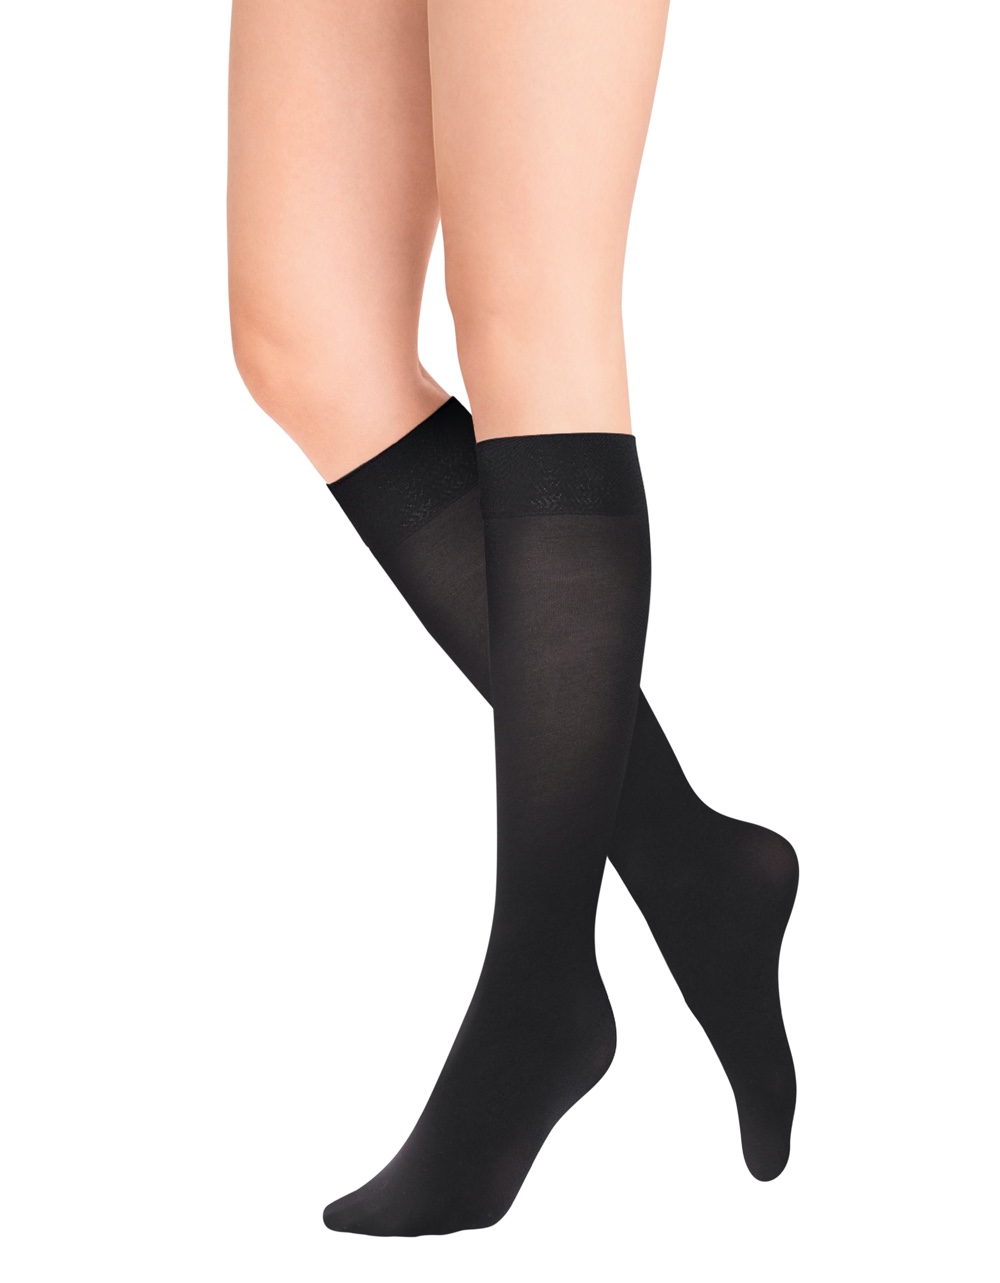 Everything You Need to Know About Choosing the Best Compression Socks ...